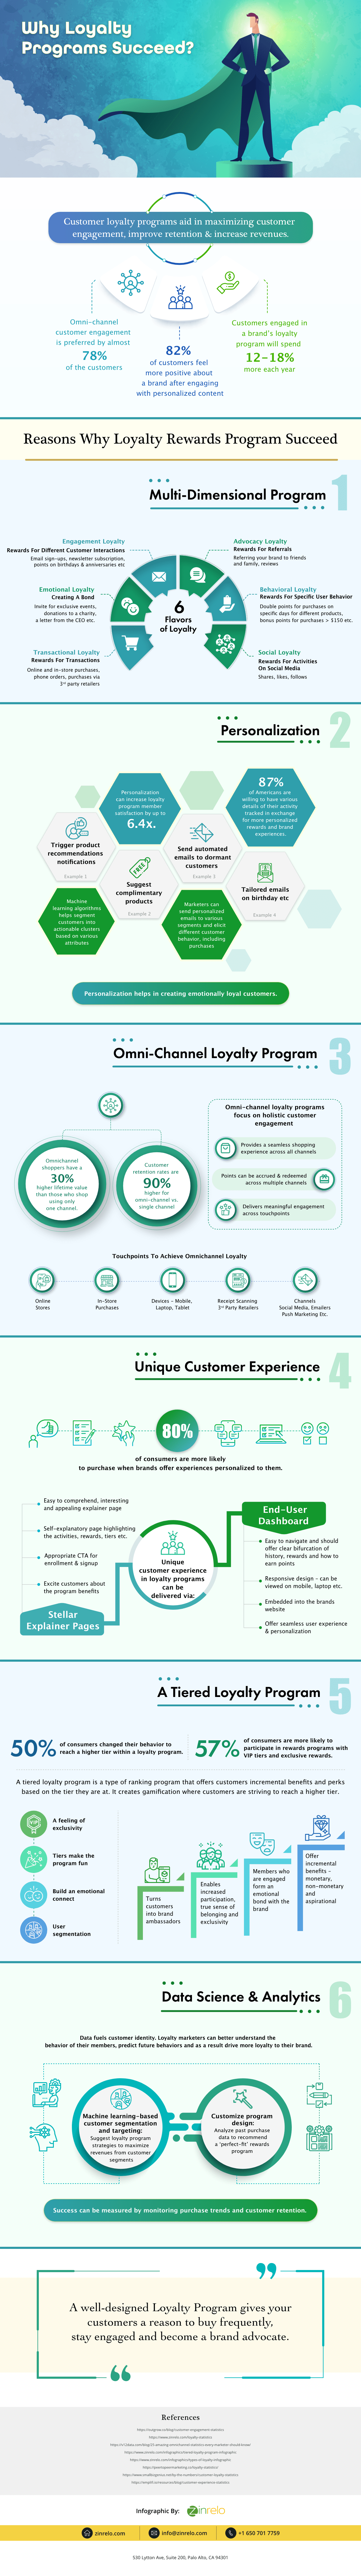 Why Loyalty Programs Succeed? [Infographic]